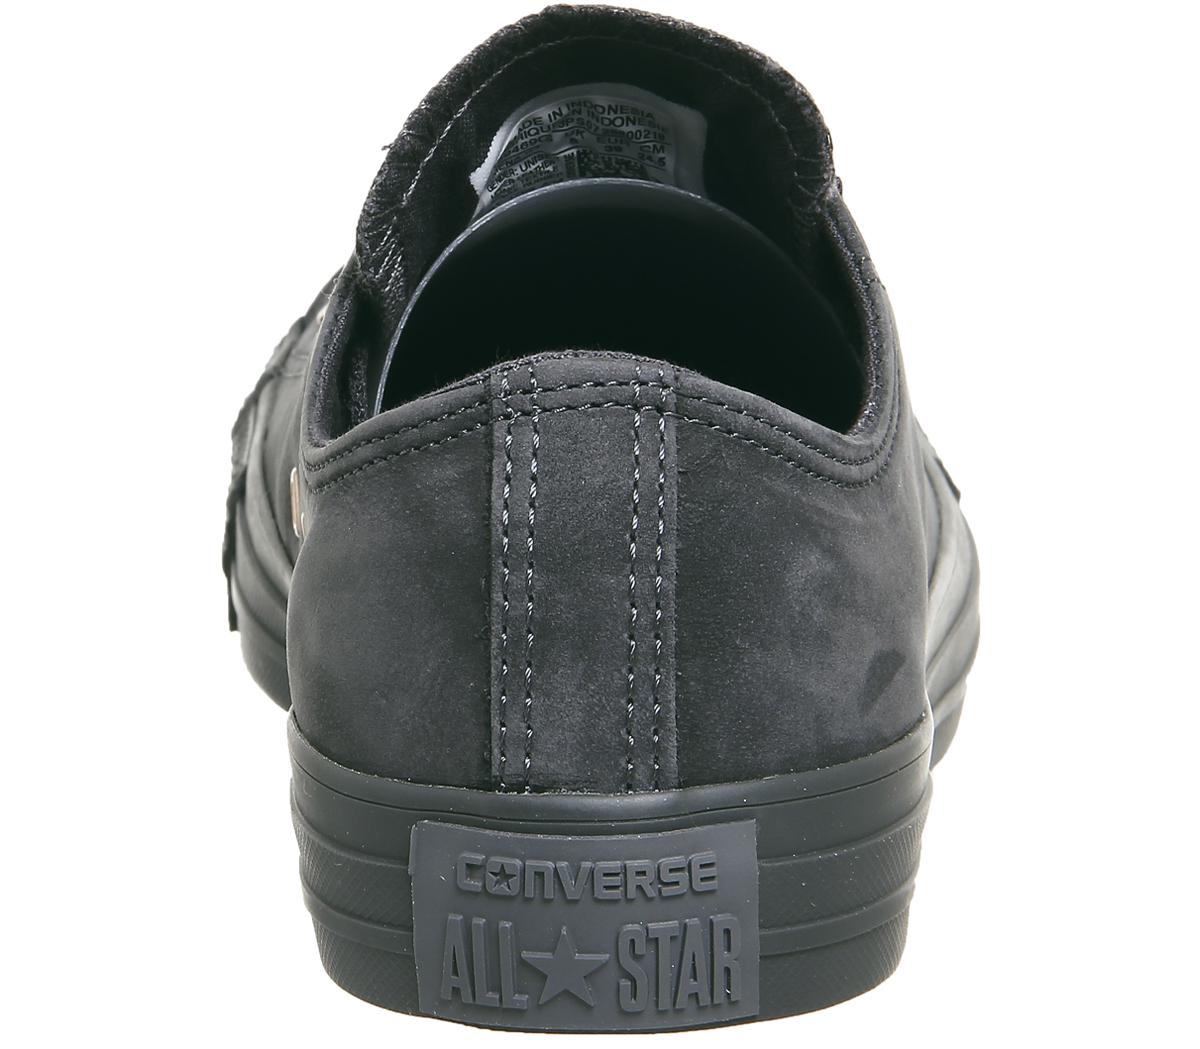 converse almost black rose gold